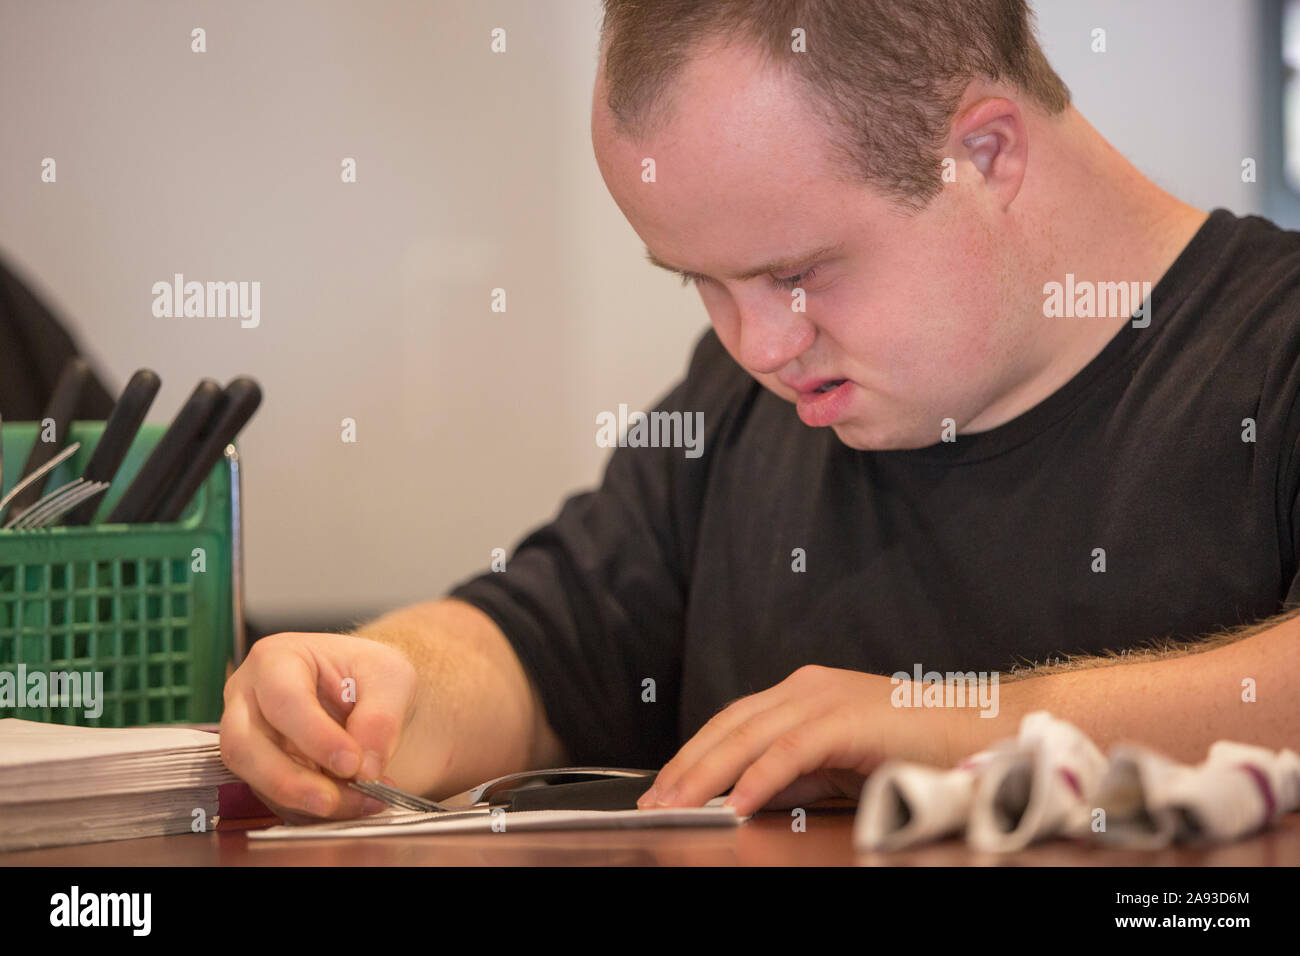 Waiter with Down Syndrome preparing napkin and silver in a restaurant Stock Photo